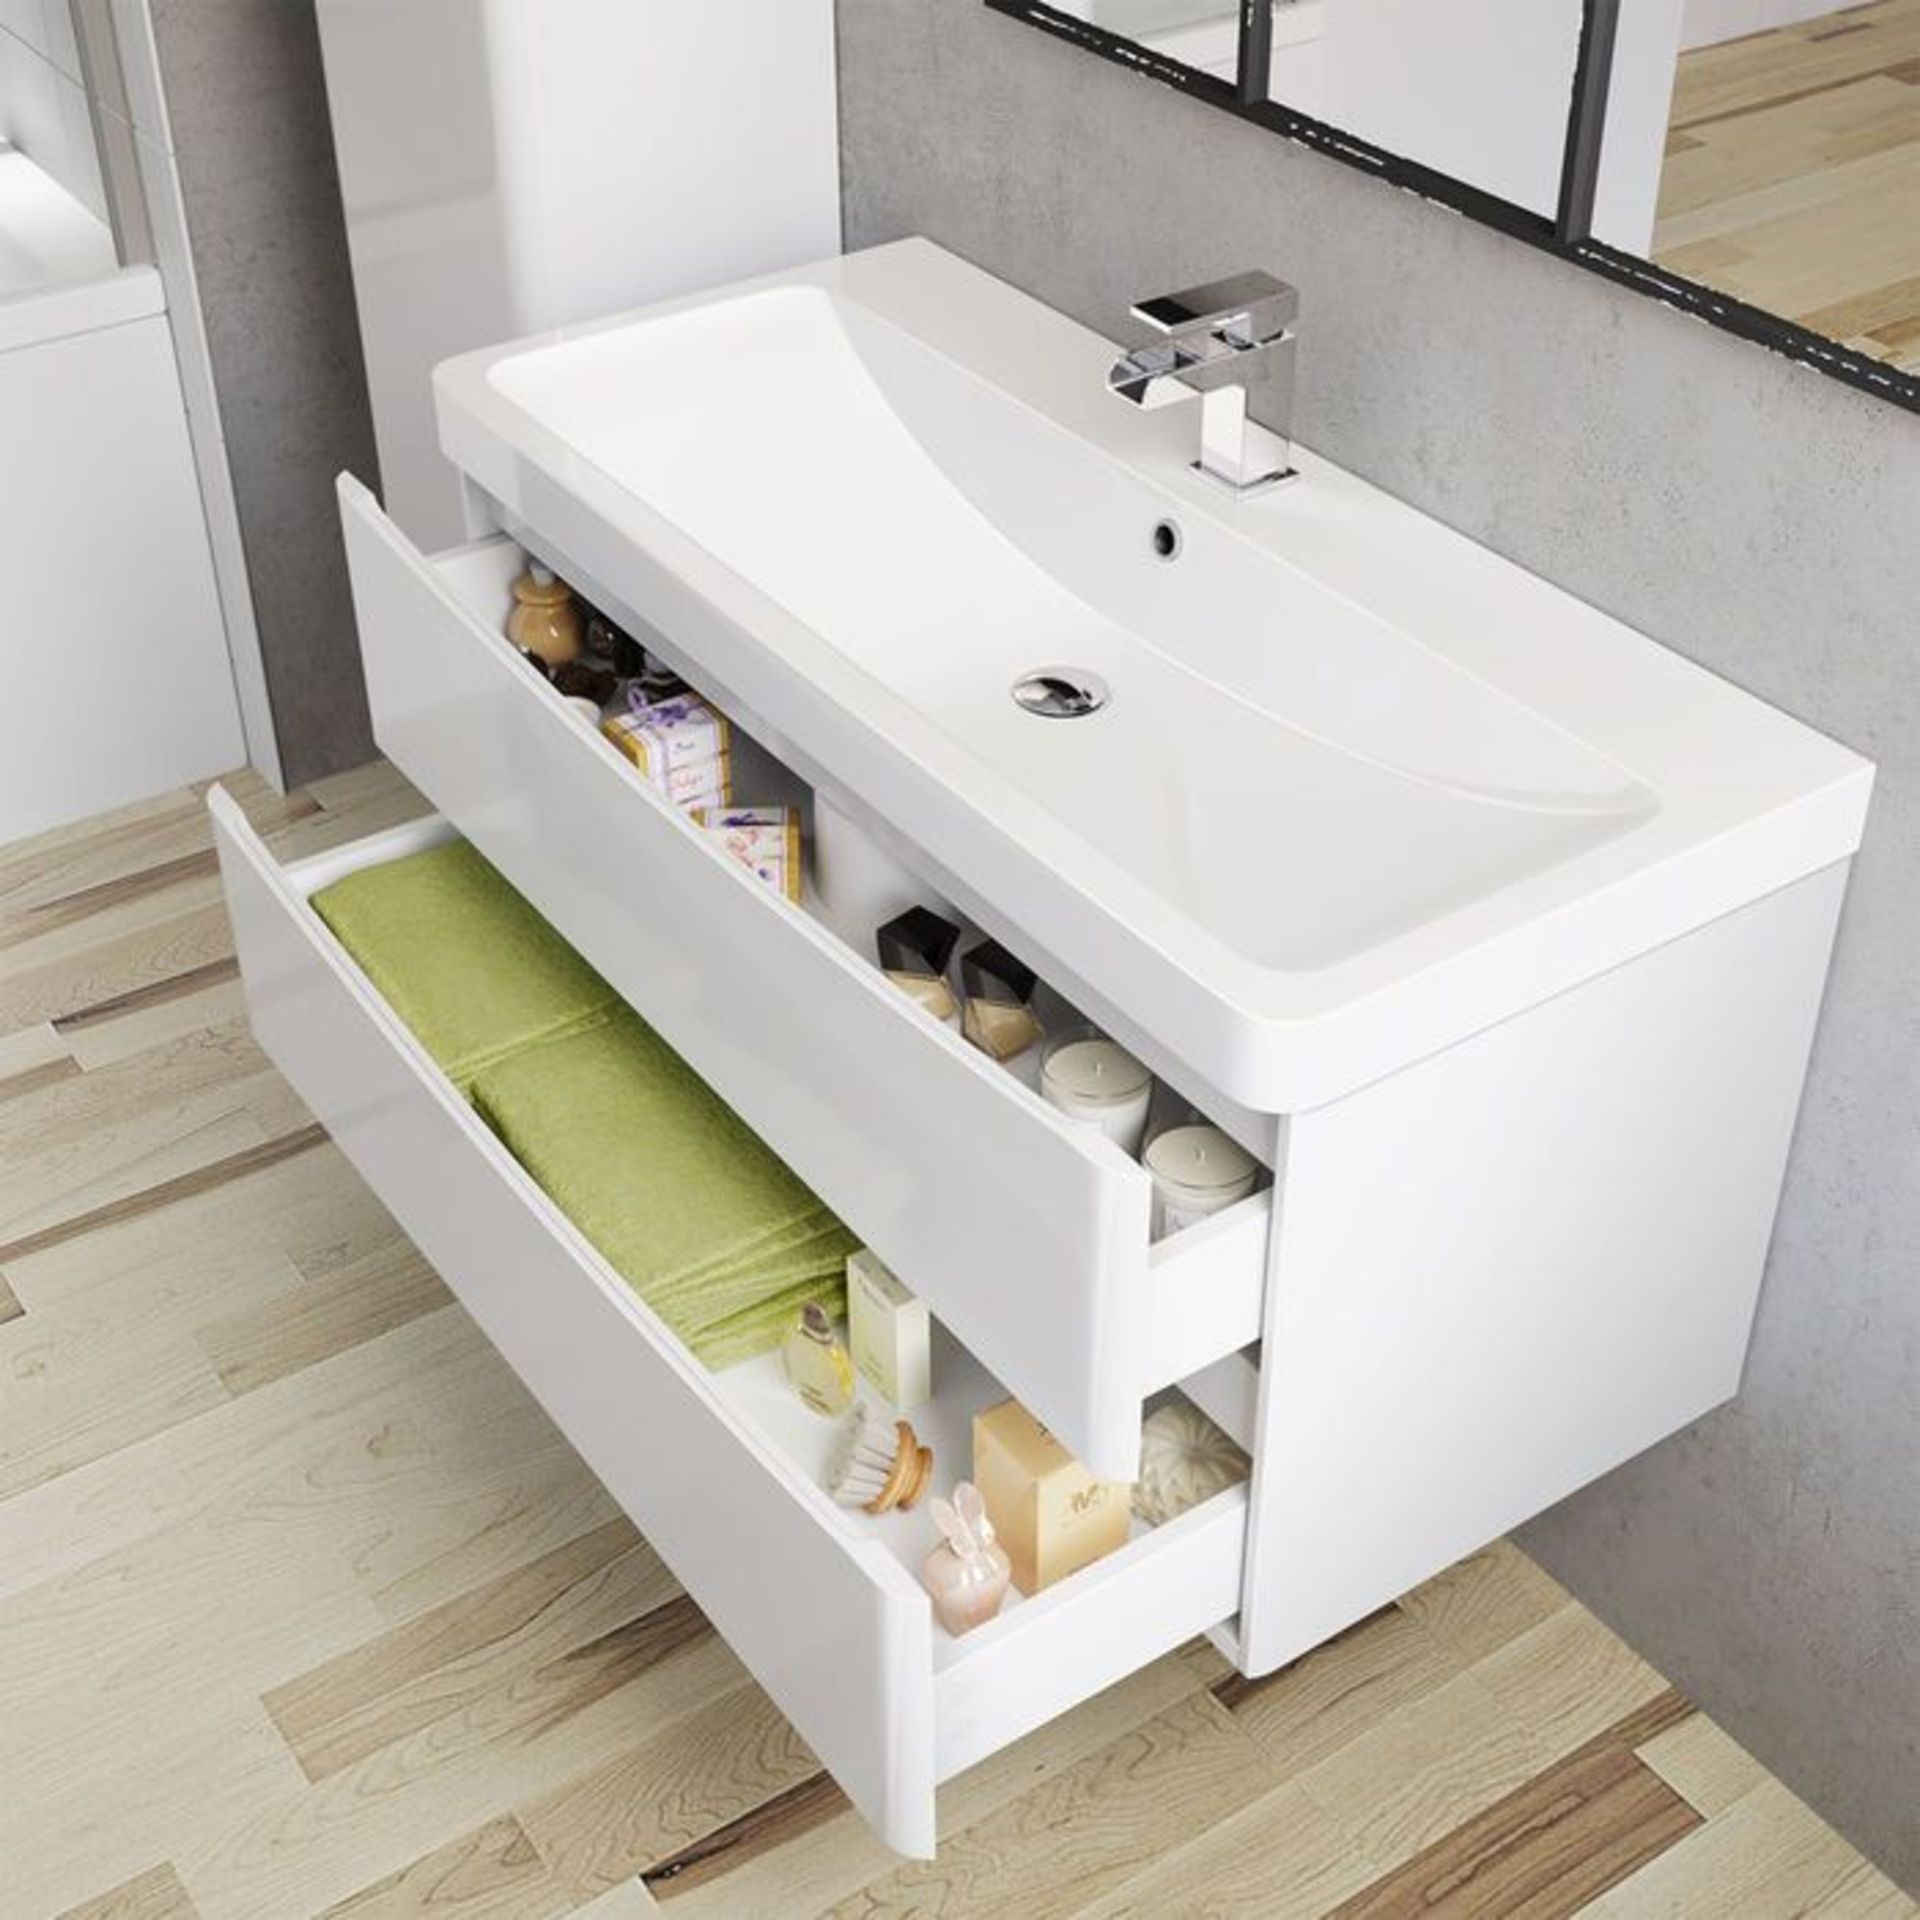 NEW 1000mm Austin II Gloss White Built In Basin Drawer Unit - Wall Hung. RRP £999.99.Comes - Image 2 of 2